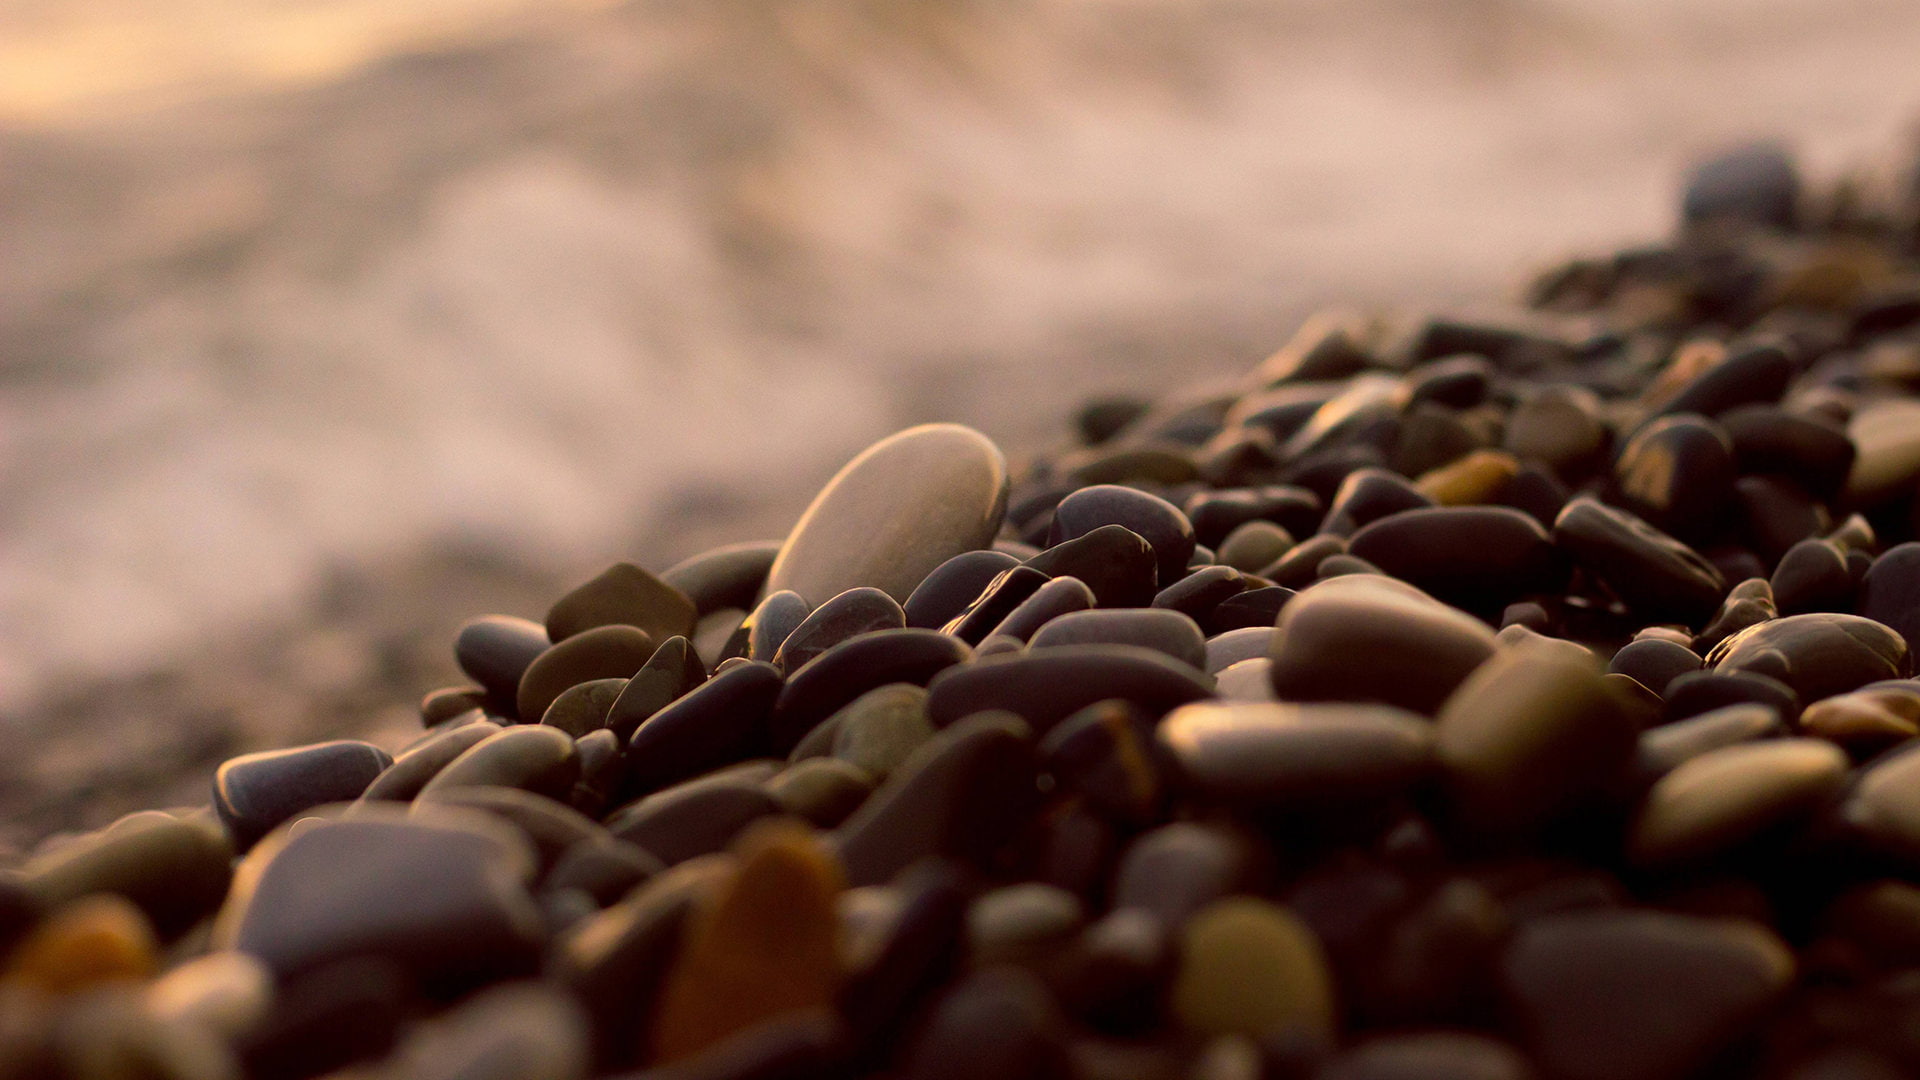 nature, brown, photography, blurred, pebbles, natural light